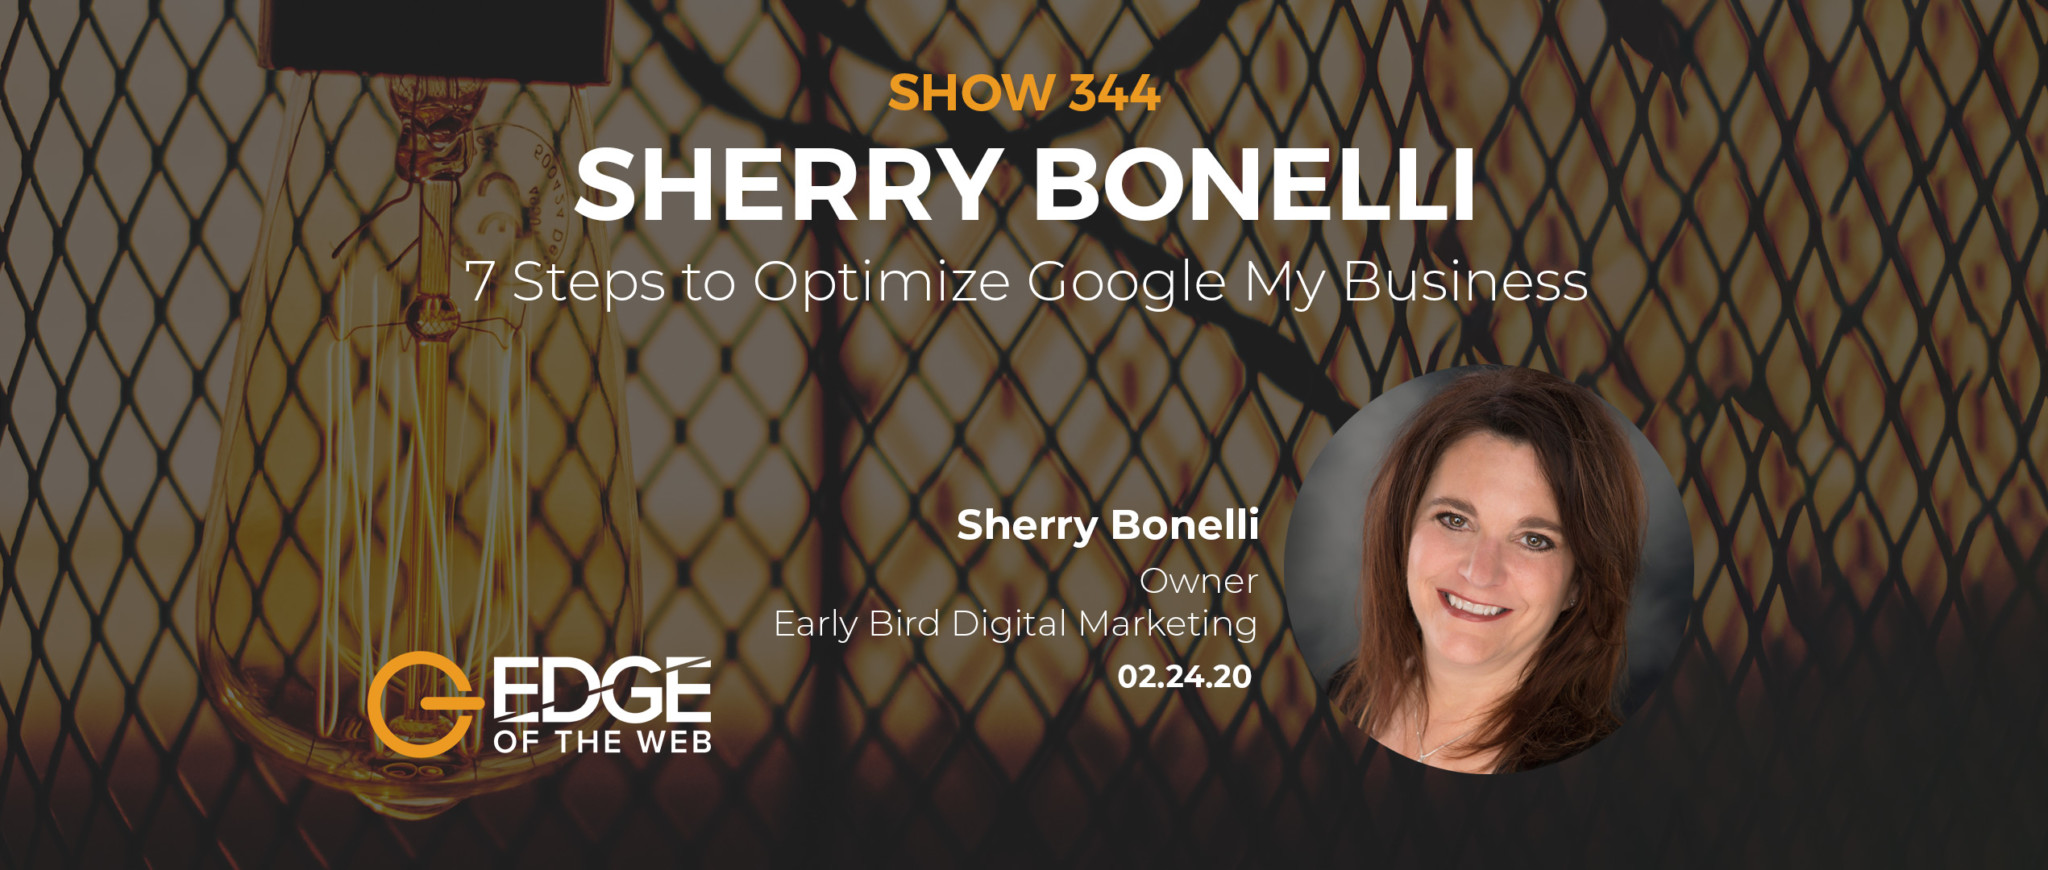 EP 344: 7 Steps to Optimize Google My Business with Sherry Bonelli